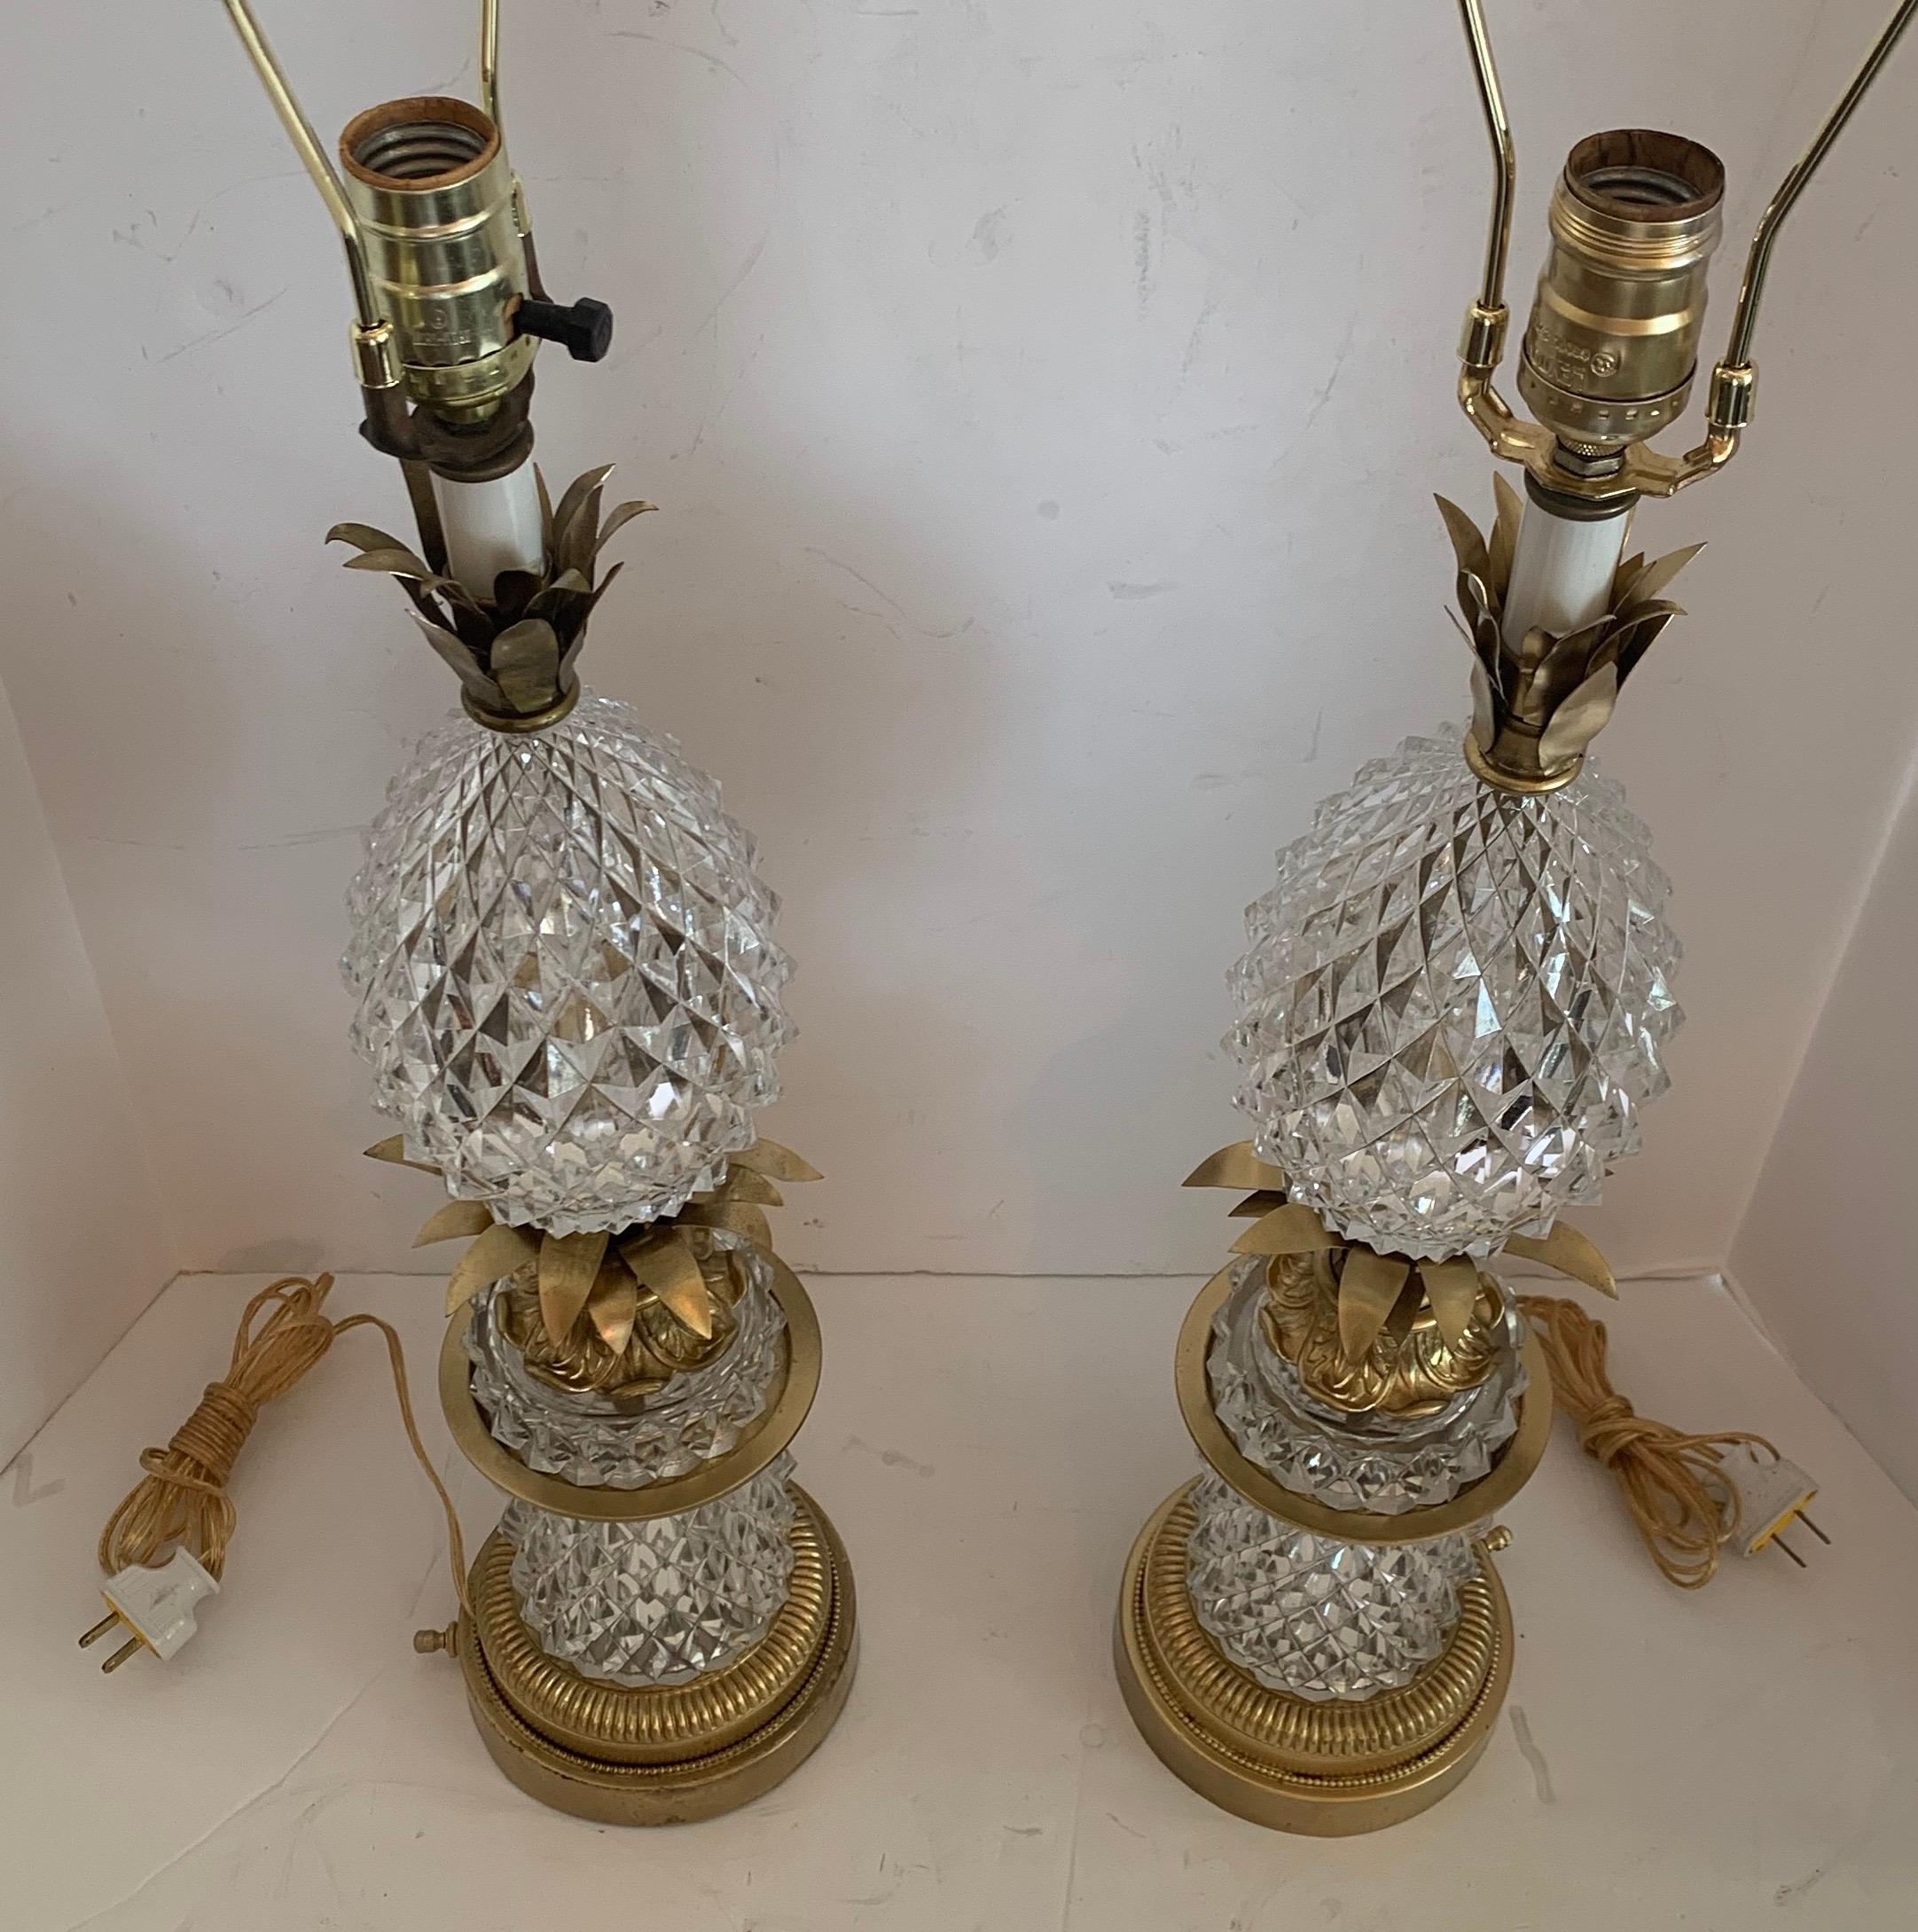 Faceted Wonderful Baccarat French Cut Crystal Bronze Ormolu Mounted Pineapple Lamps Pair